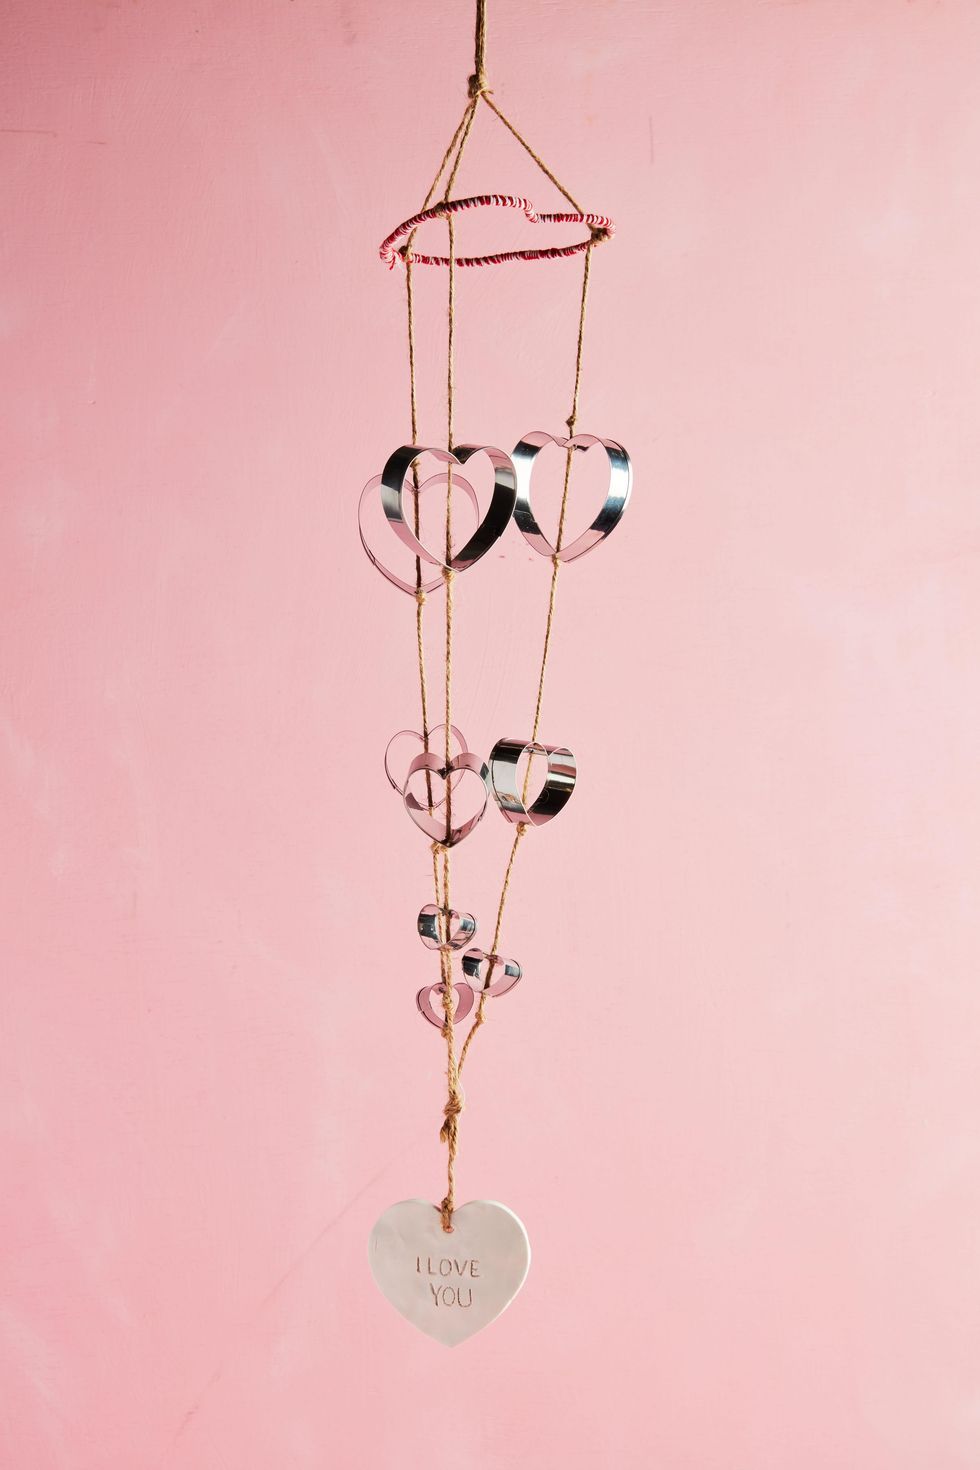 heartshaped cookie cutter wind chimes